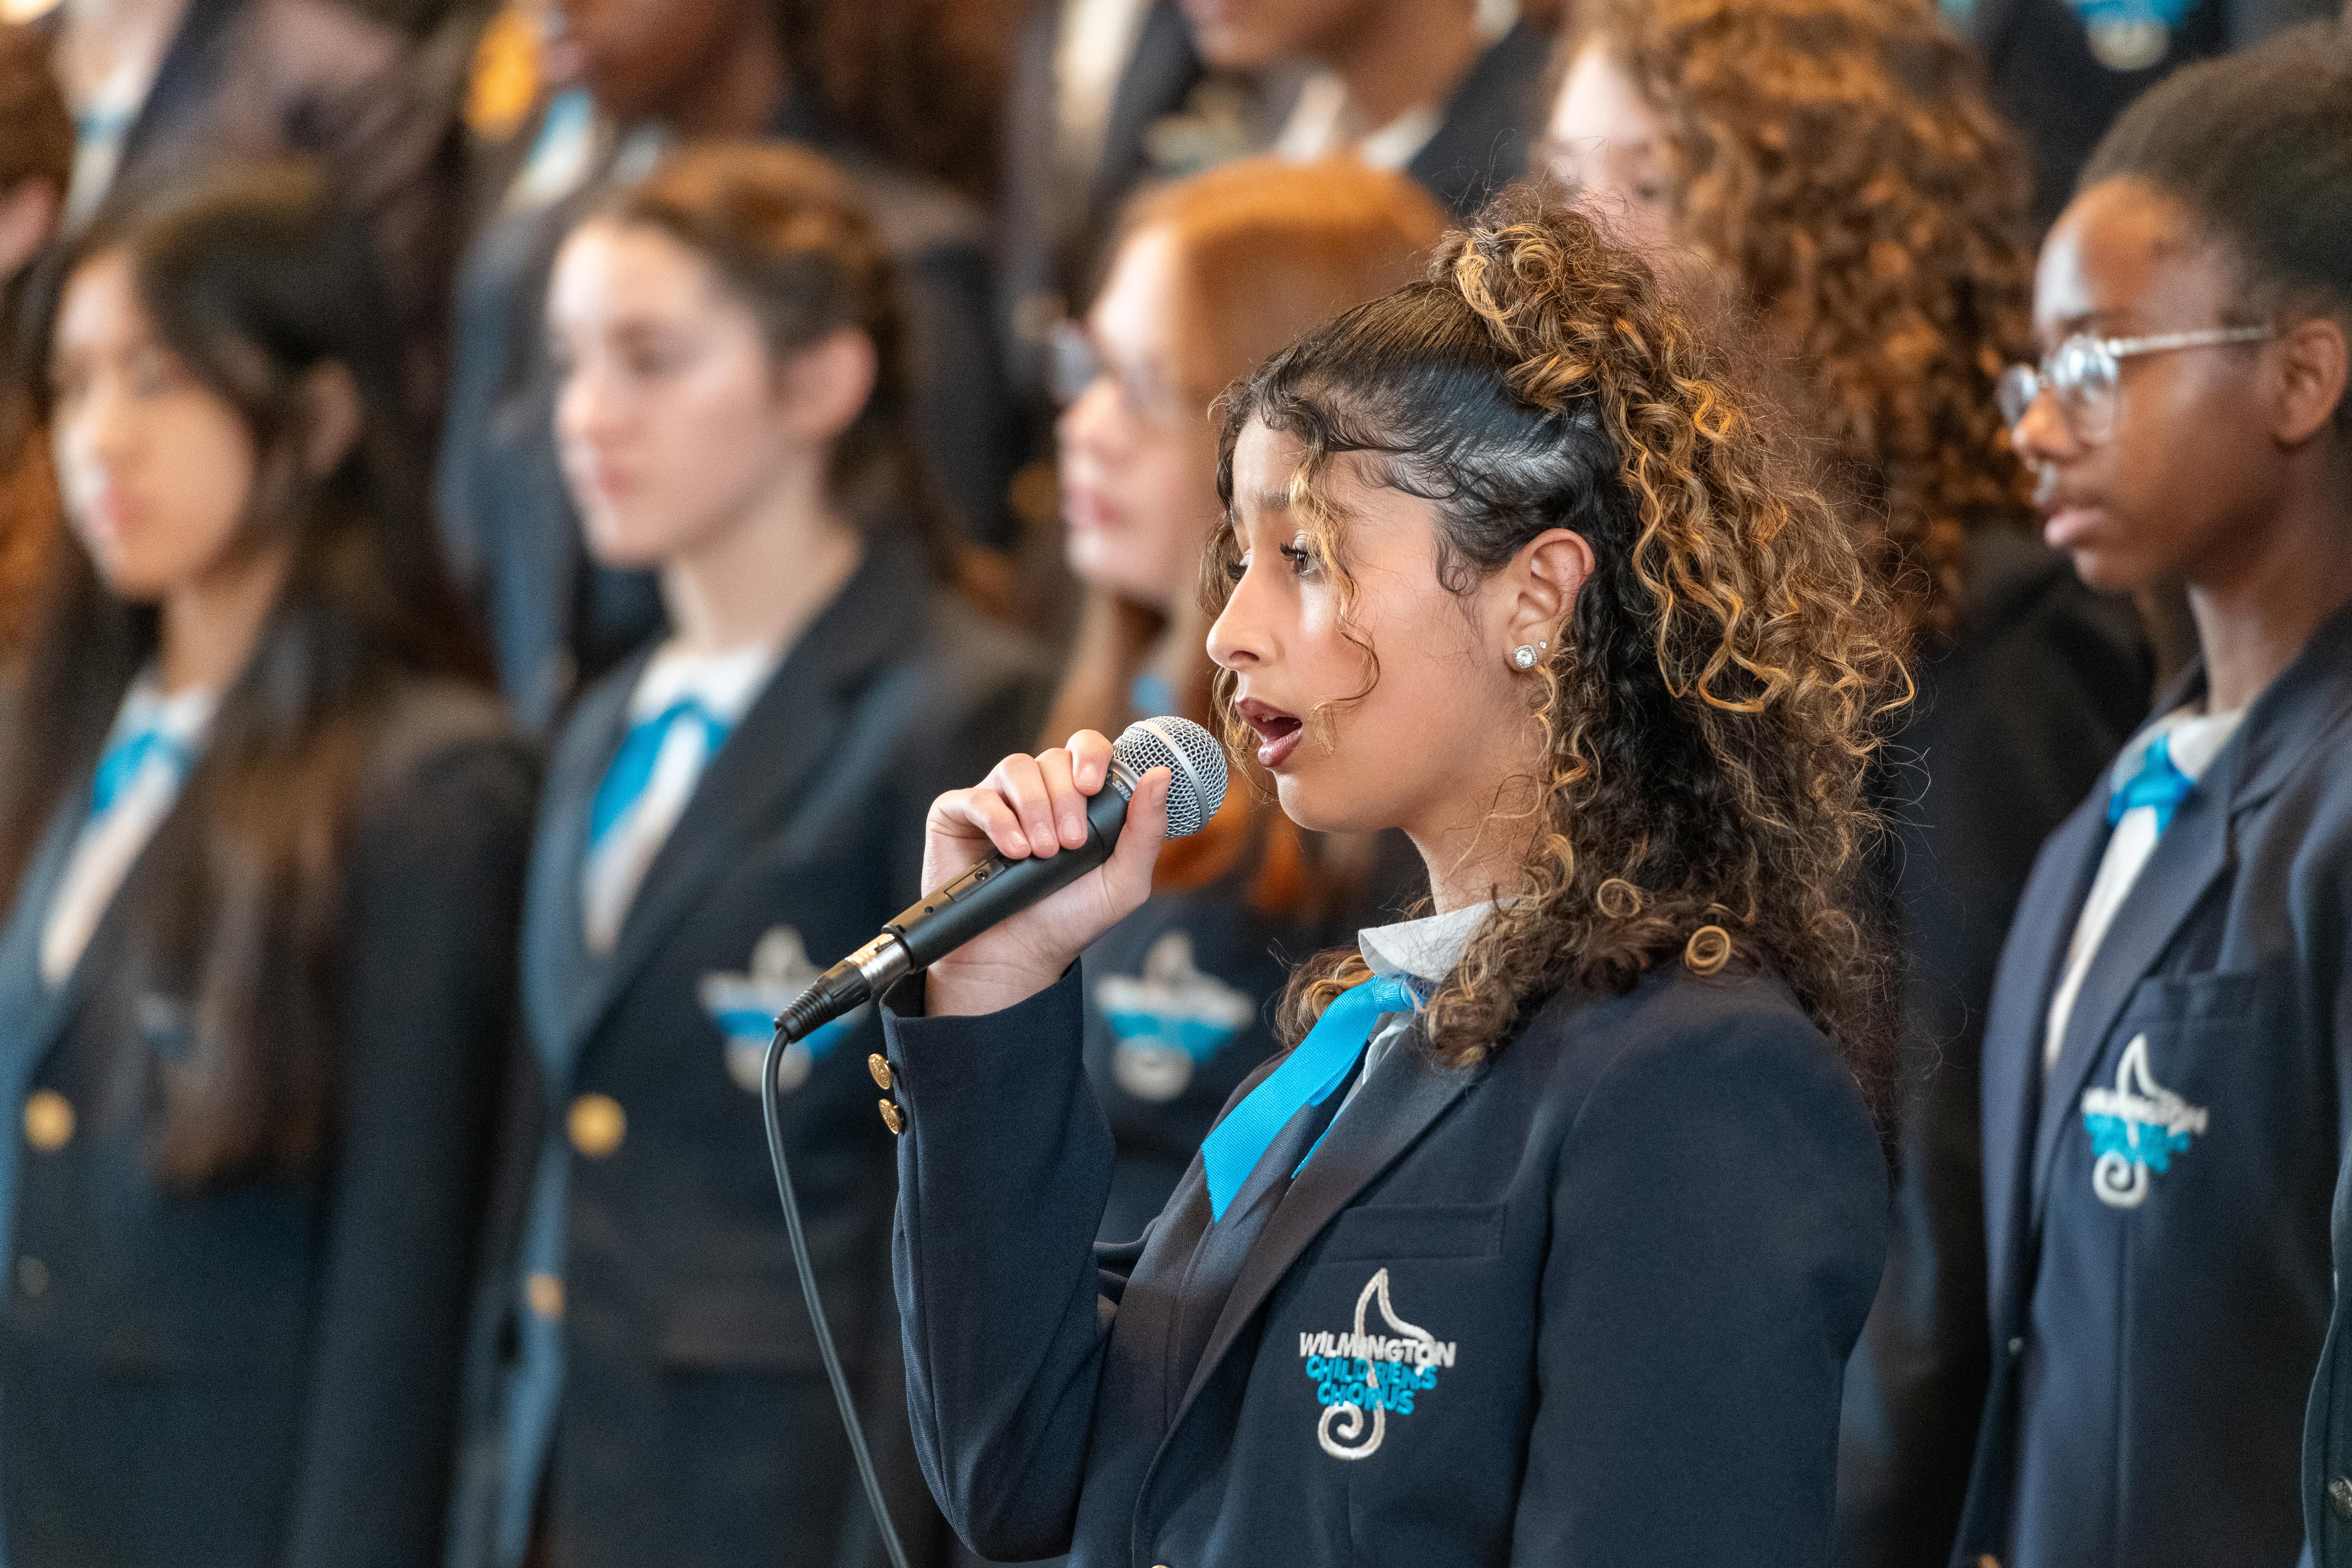 students performing in a choir event